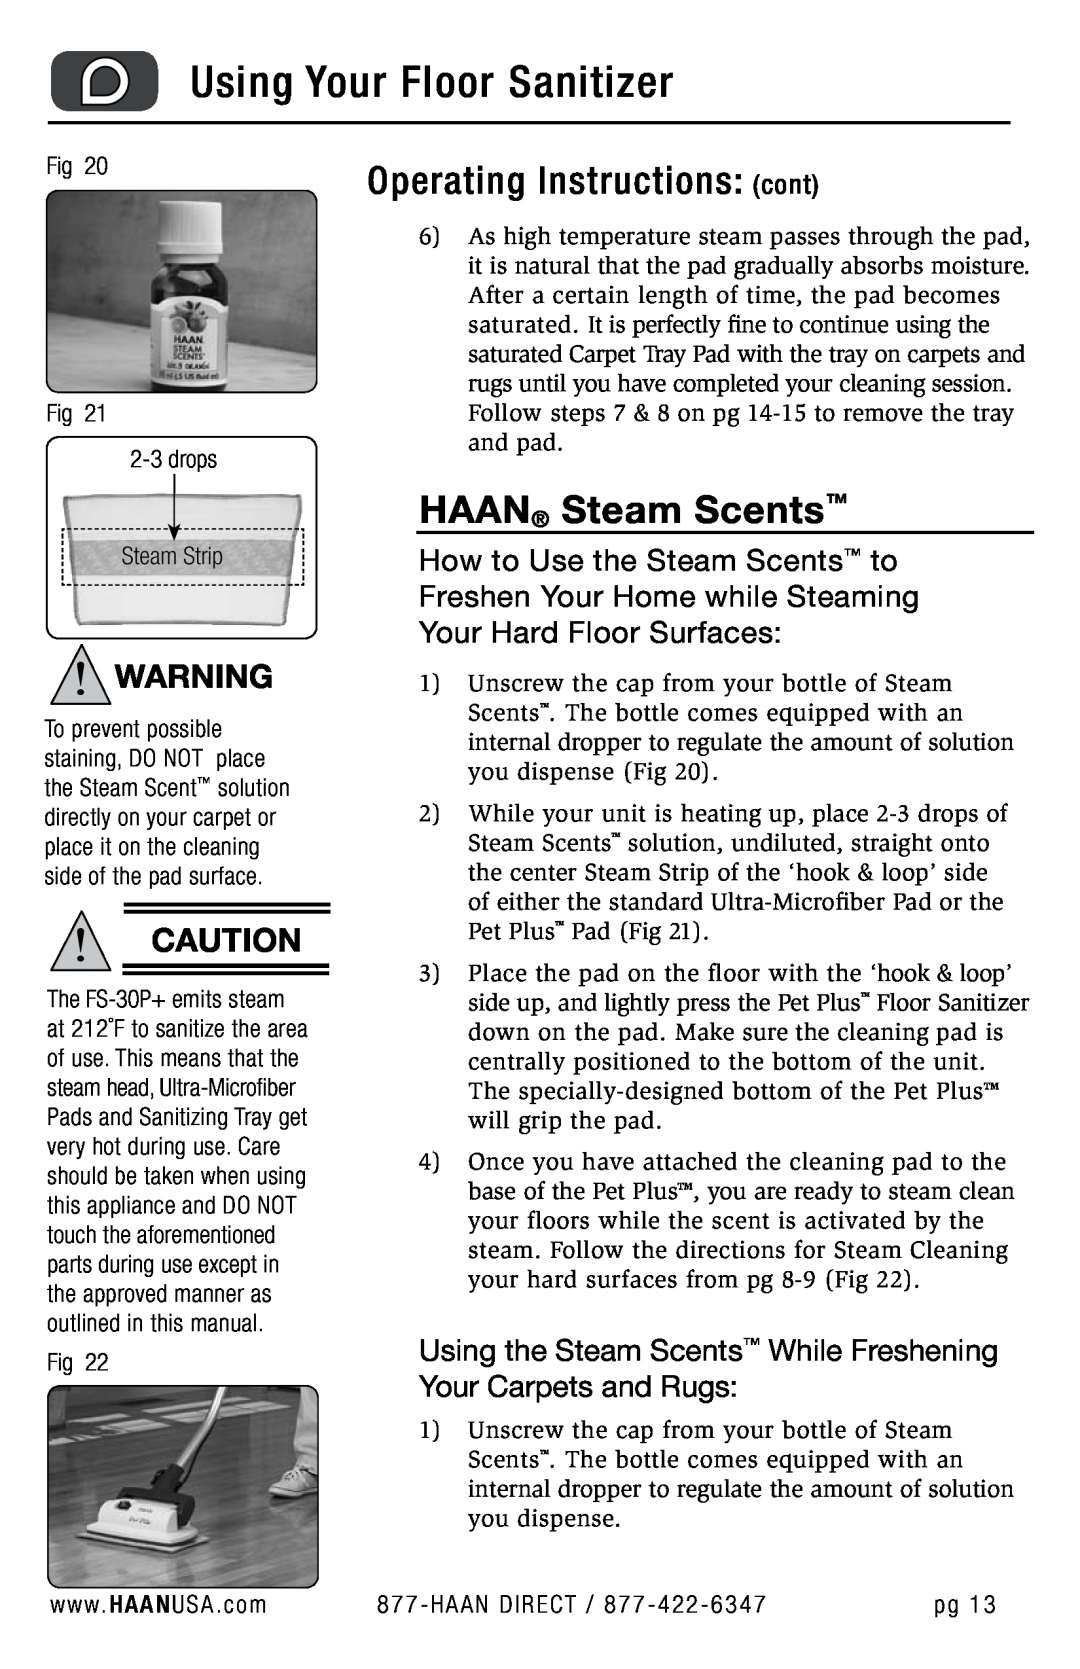 Haan FS-30P+ Using the Steam Scents While Freshening Your Carpets and Rugs, Using Your Floor Sanitizer, HAAN Steam Scents 